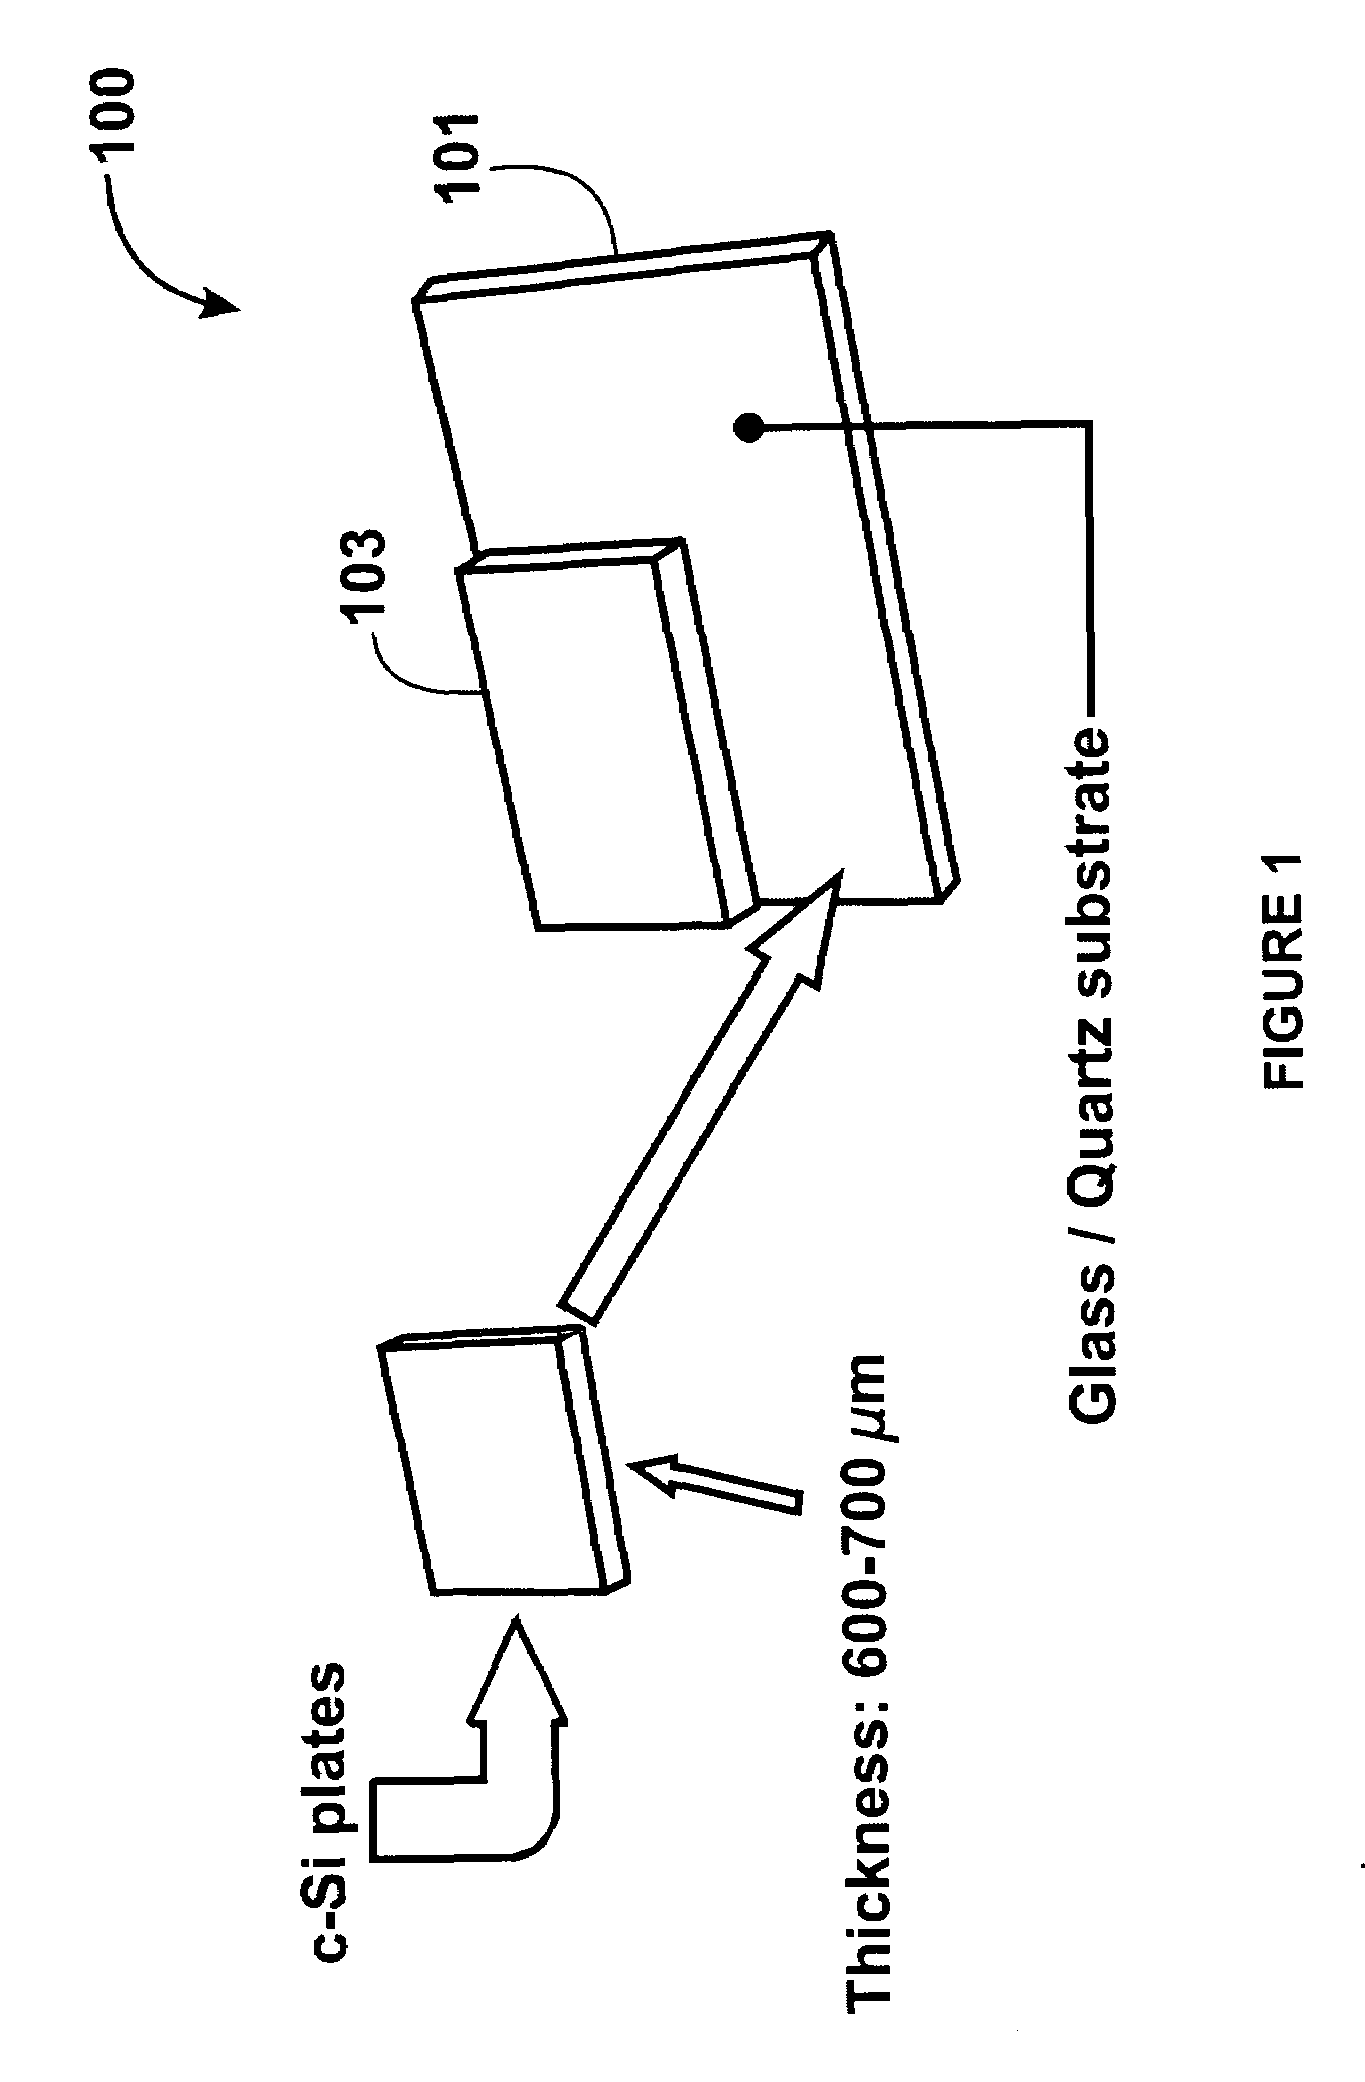 Method and structure for fabricating multiple tiled regions onto a plate using a controlled cleaving process